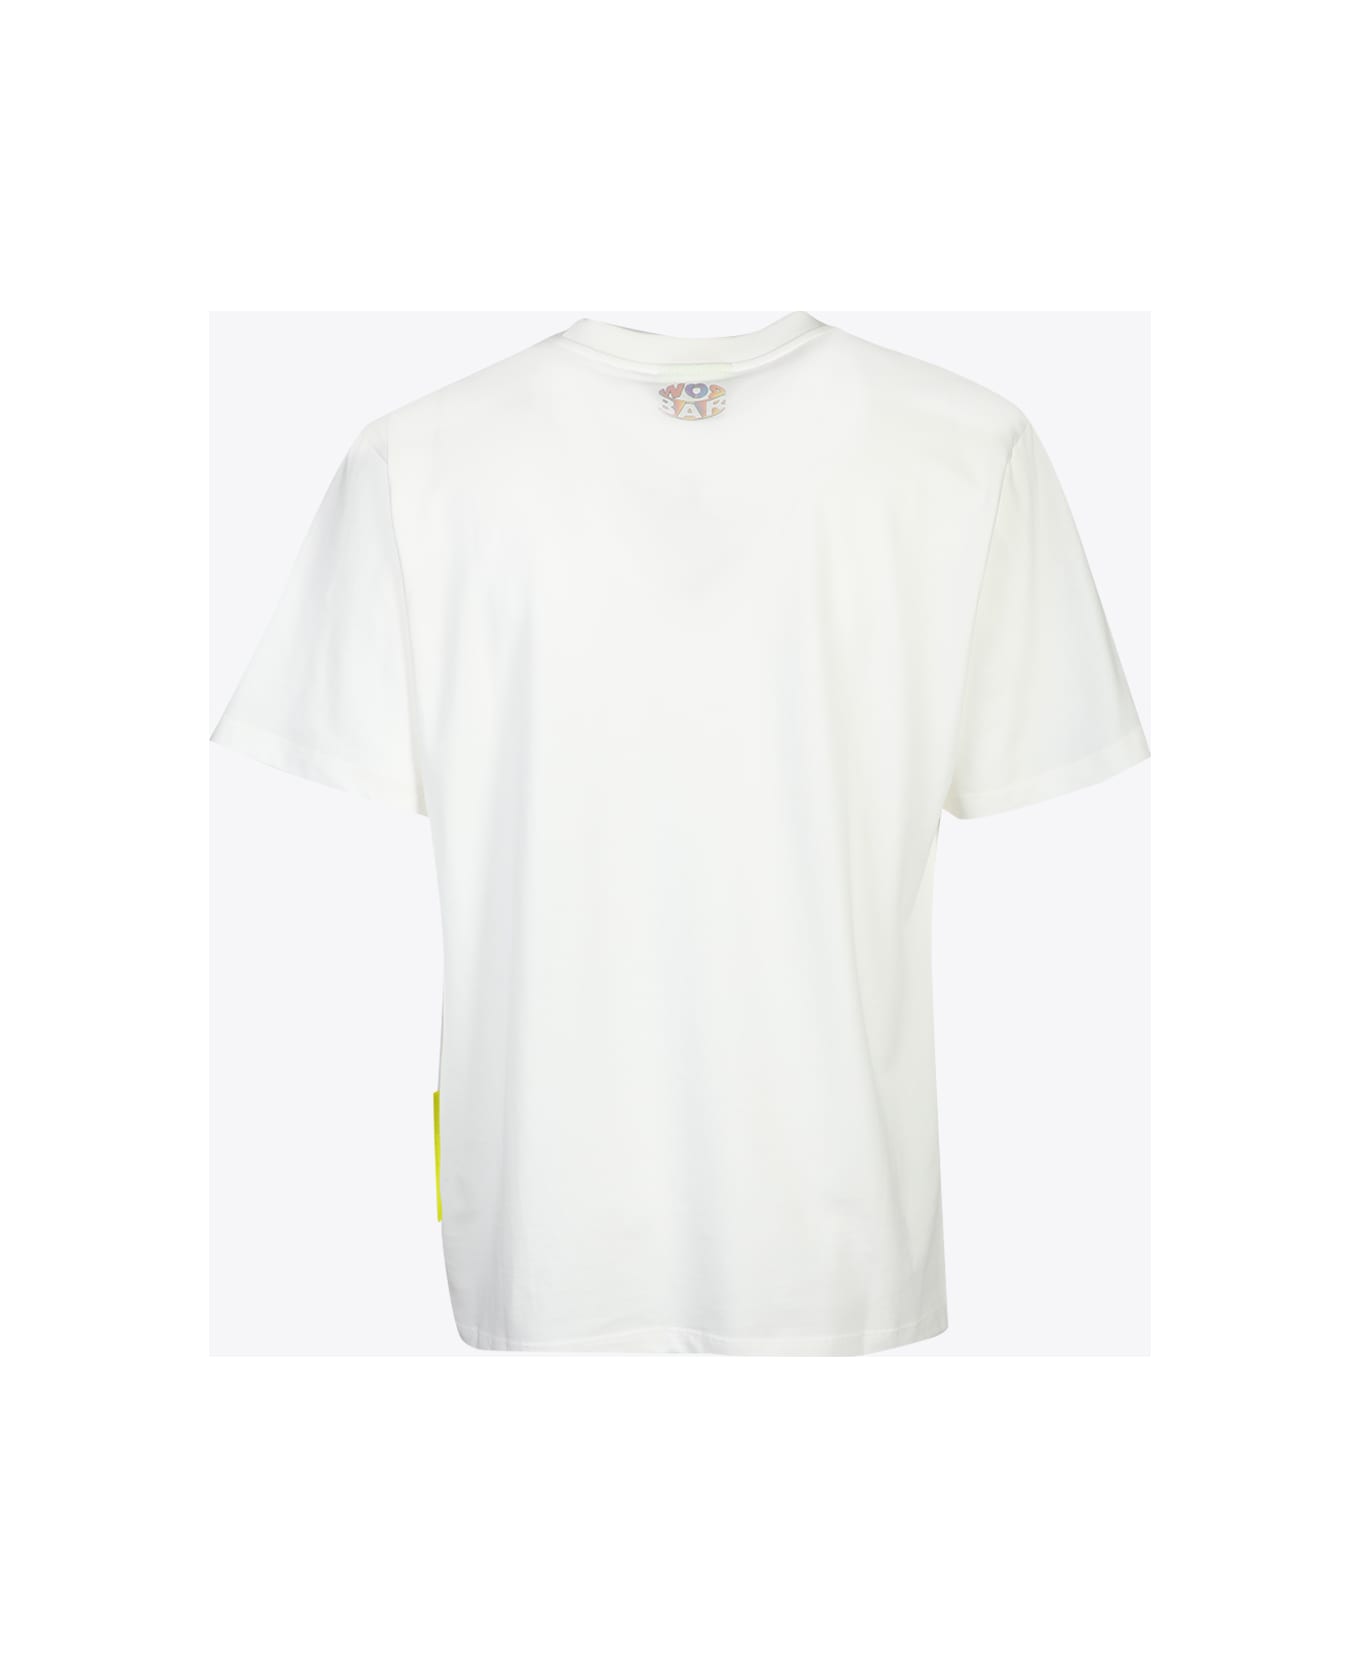 Barrow Jersey T-shirt Unisex White cotton t-shirt with chest print - Bianco